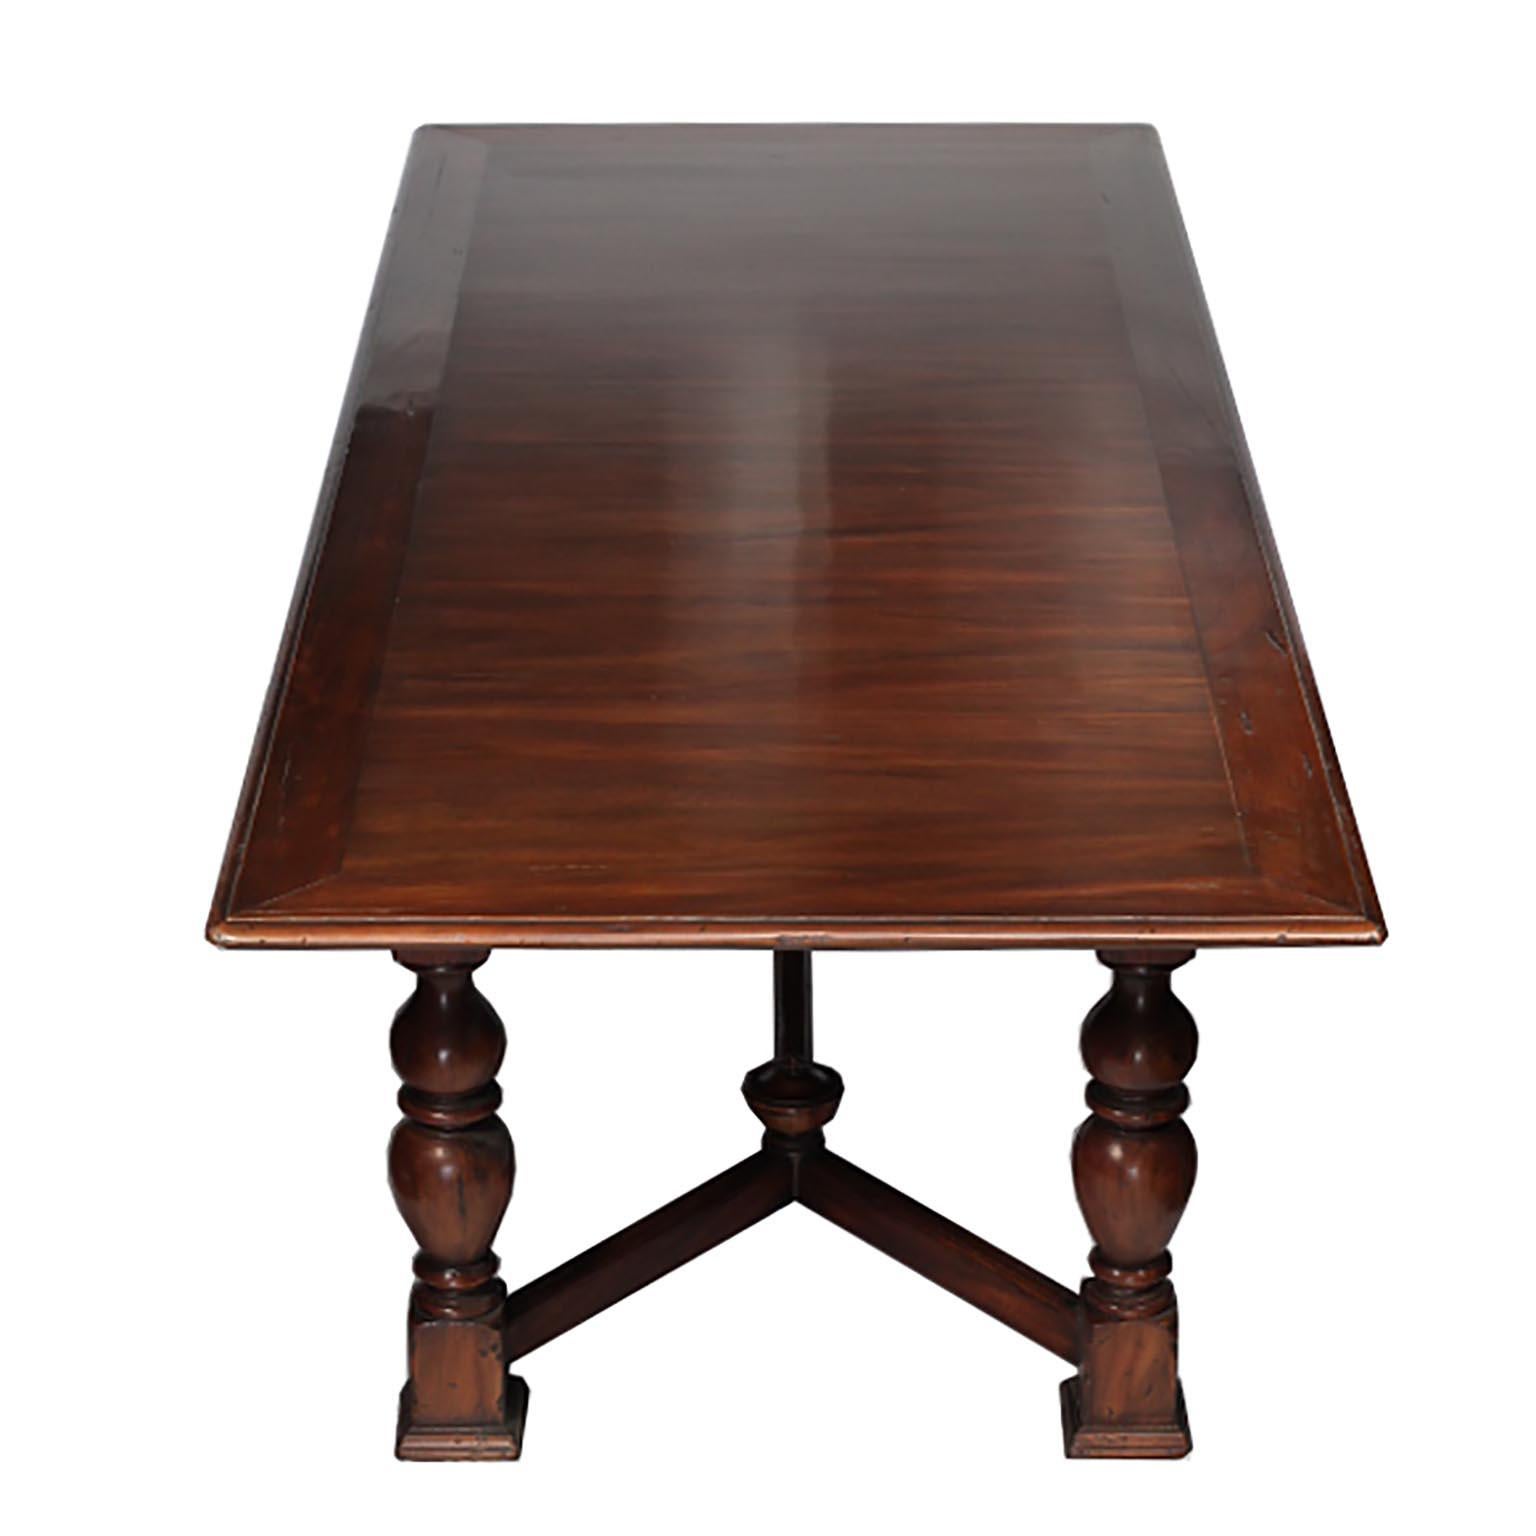 Contemporary Large Alfonso Marina Handcrafted Dining Table, circa 2003